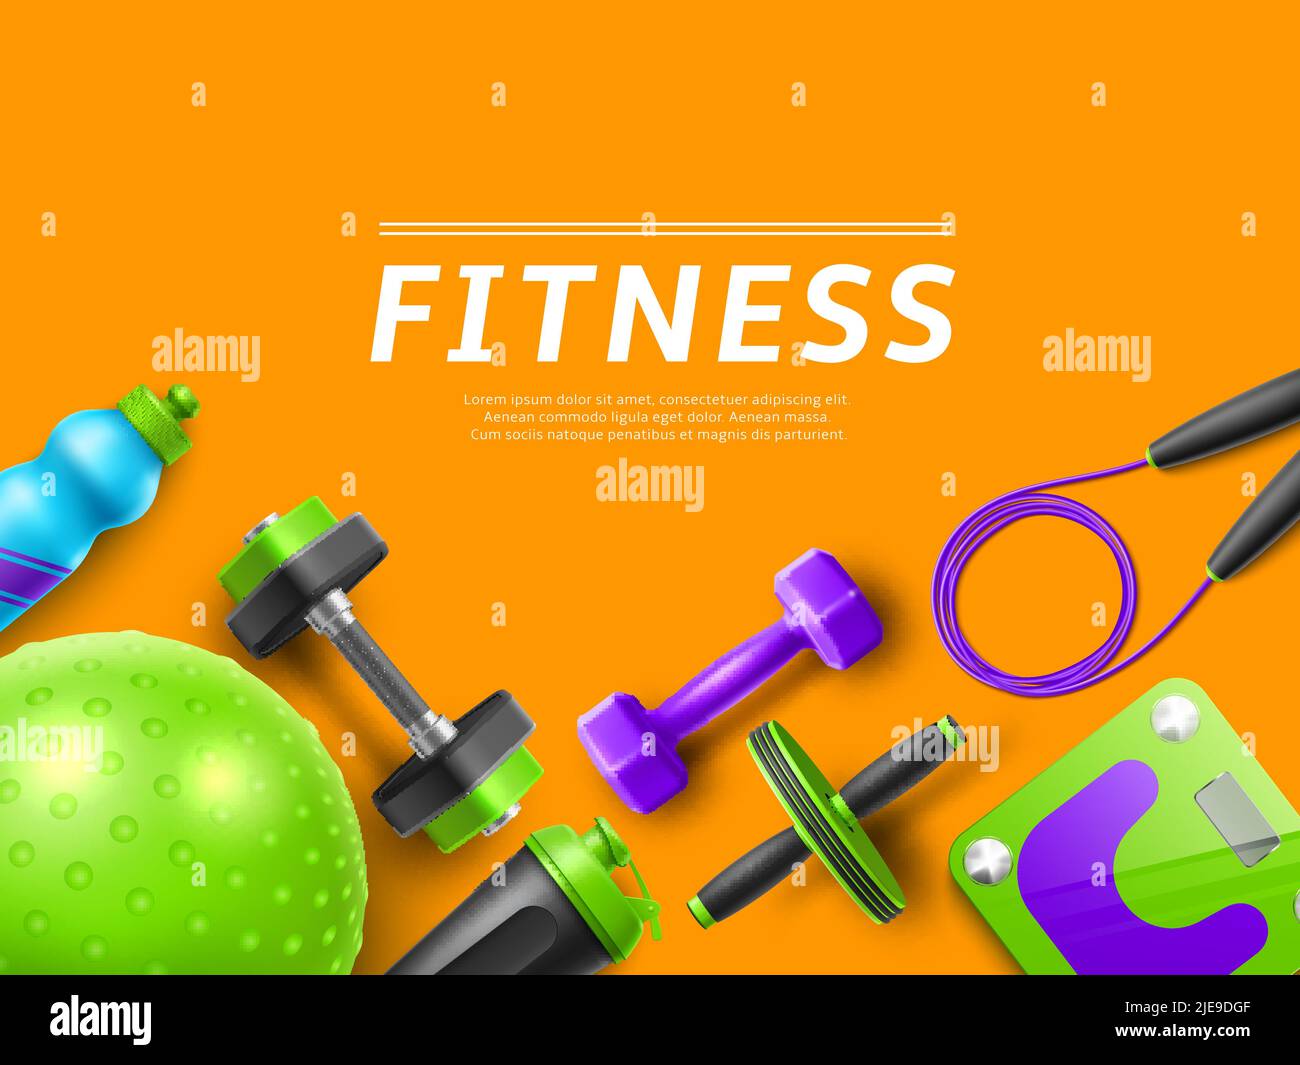 https://c8.alamy.com/comp/2JE9DGF/realistic-gym-fitness-accessories-frame-background-with-place-for-text-training-yoga-equipment-sports-devices-female-workout-objects-3d-skipping-2JE9DGF.jpg